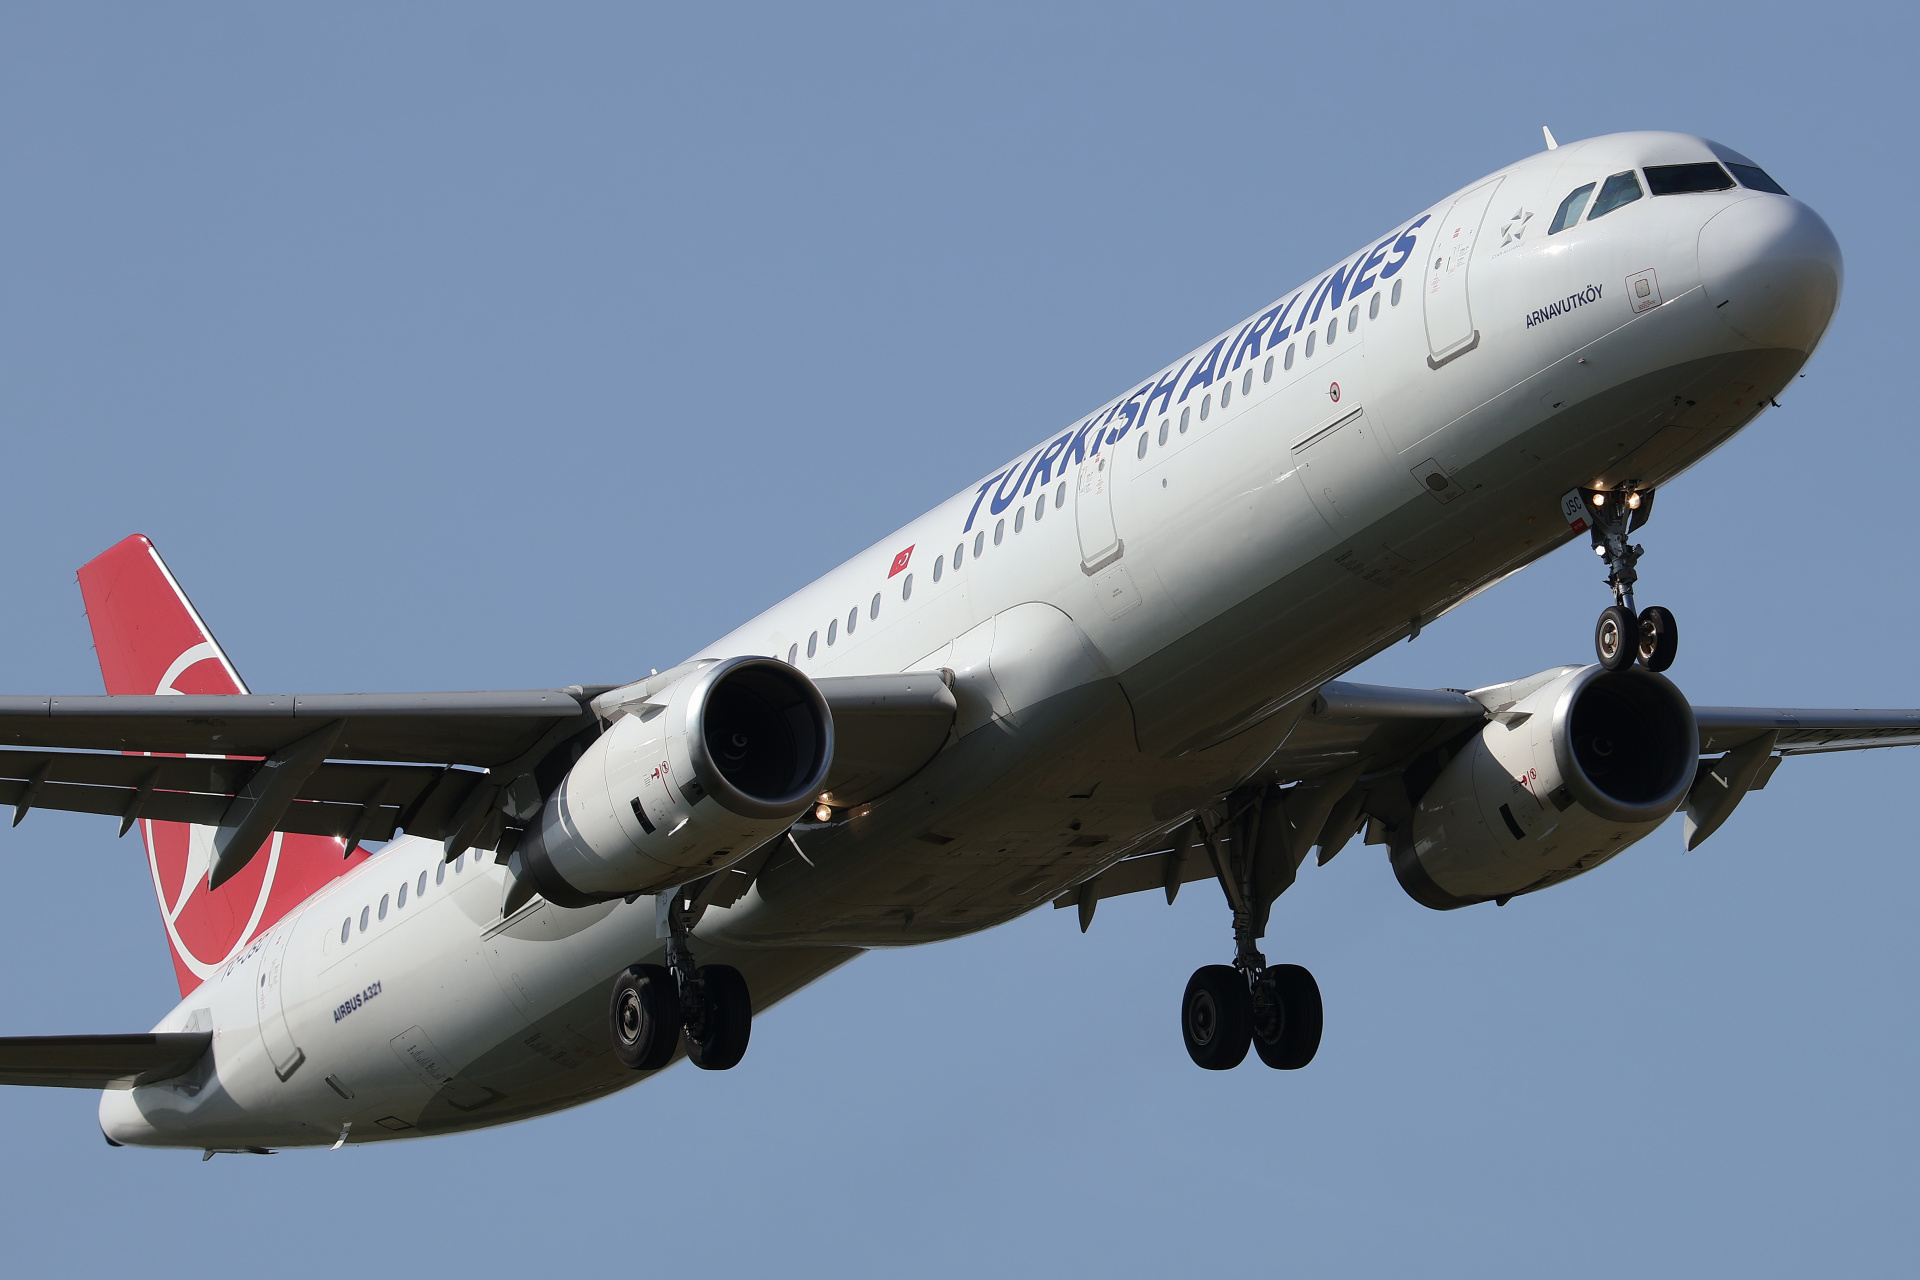 TC-JSC (Aircraft » EPWA Spotting » Airbus A321-200 » THY Turkish Airlines)